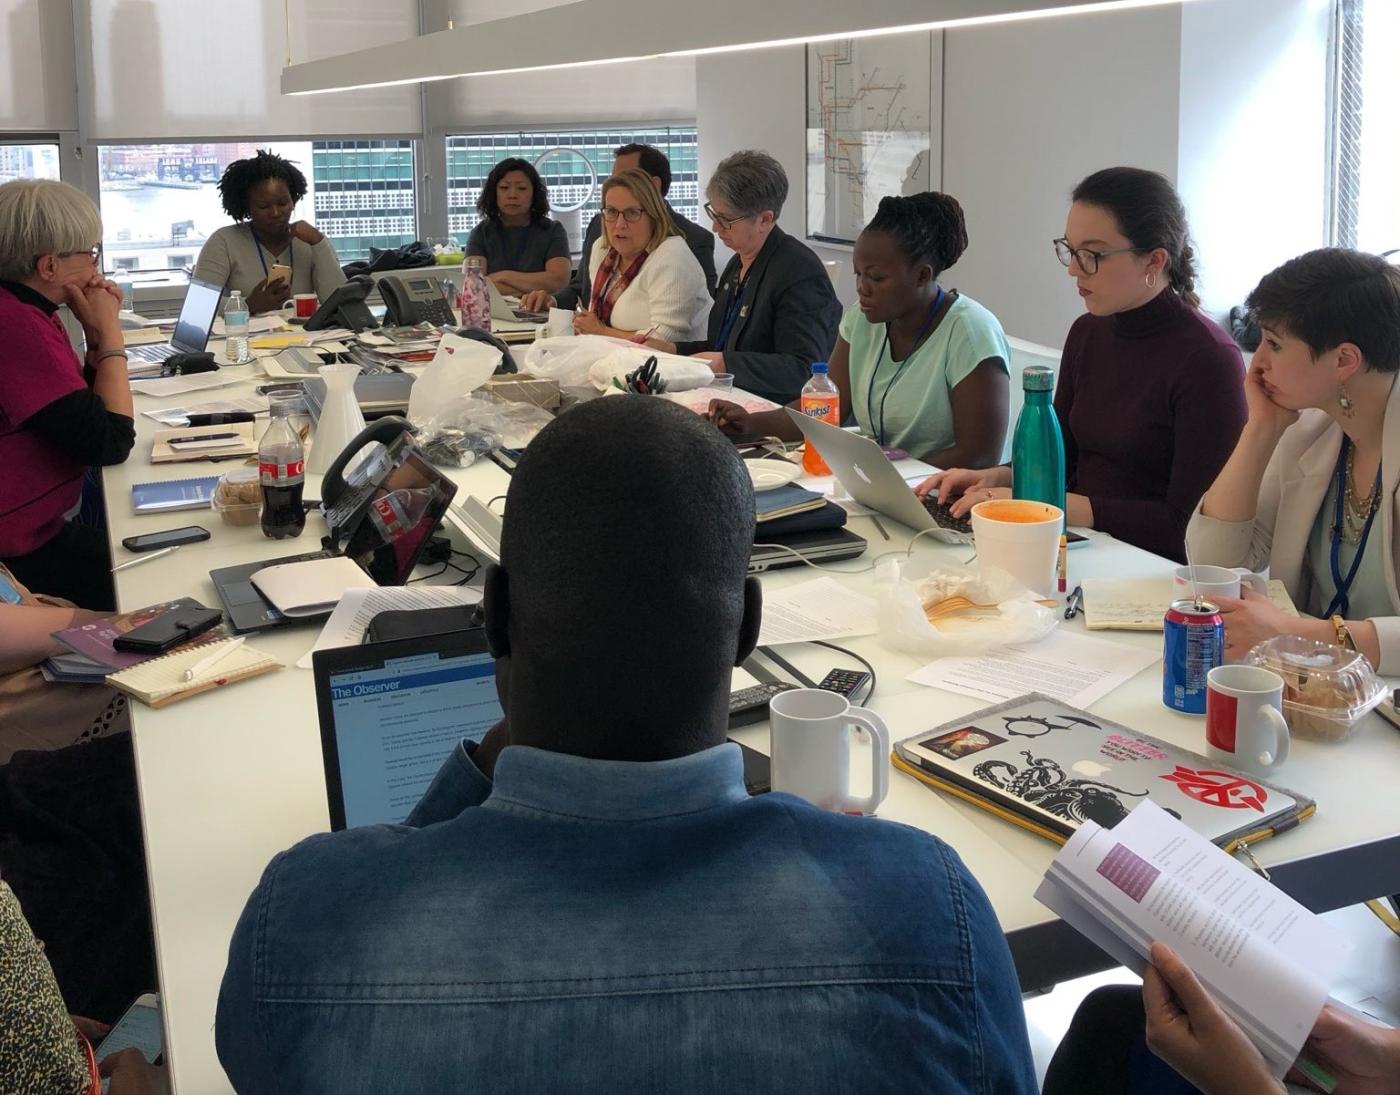 Joint meeting between WCC and ACT Alliance during the Commission on the Status of Women at the WCC UN office in New York. Photo: Nicole Ashwood/WCC